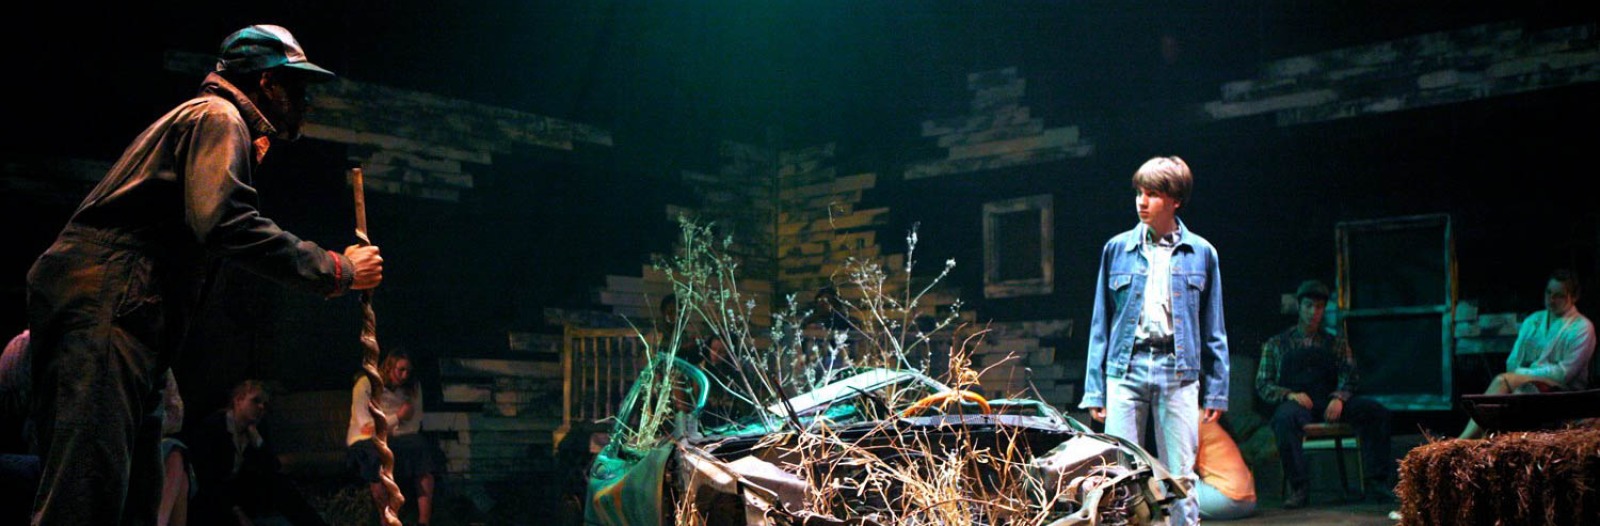 Performers in faded rural costuming converse across a beat up car in Flanagan Theatre